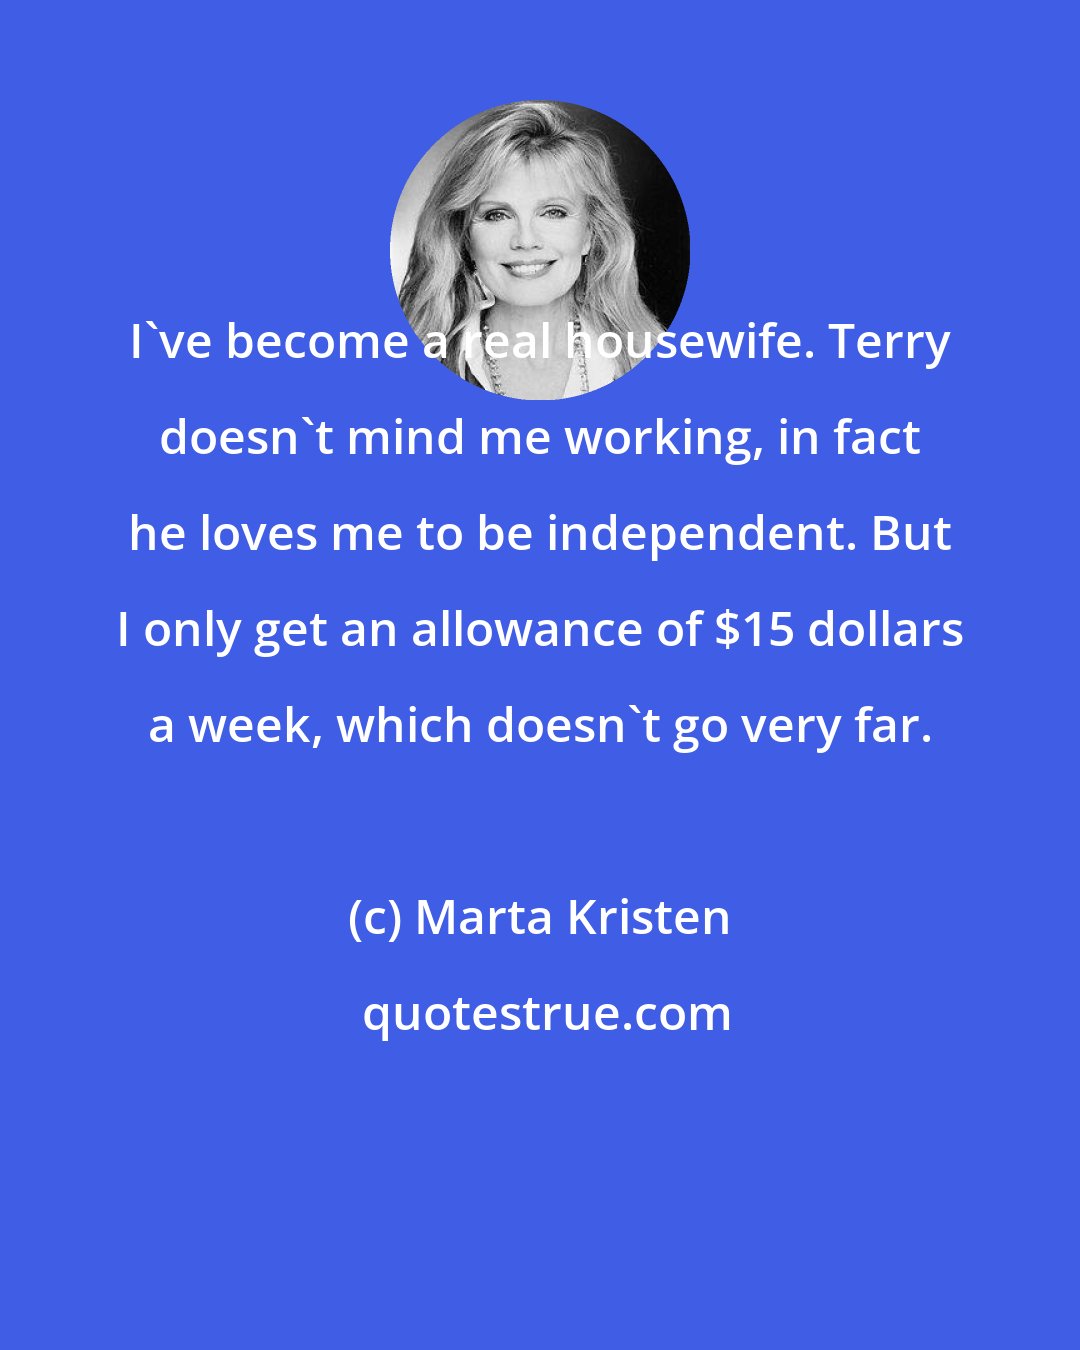 Marta Kristen: I've become a real housewife. Terry doesn't mind me working, in fact he loves me to be independent. But I only get an allowance of $15 dollars a week, which doesn't go very far.